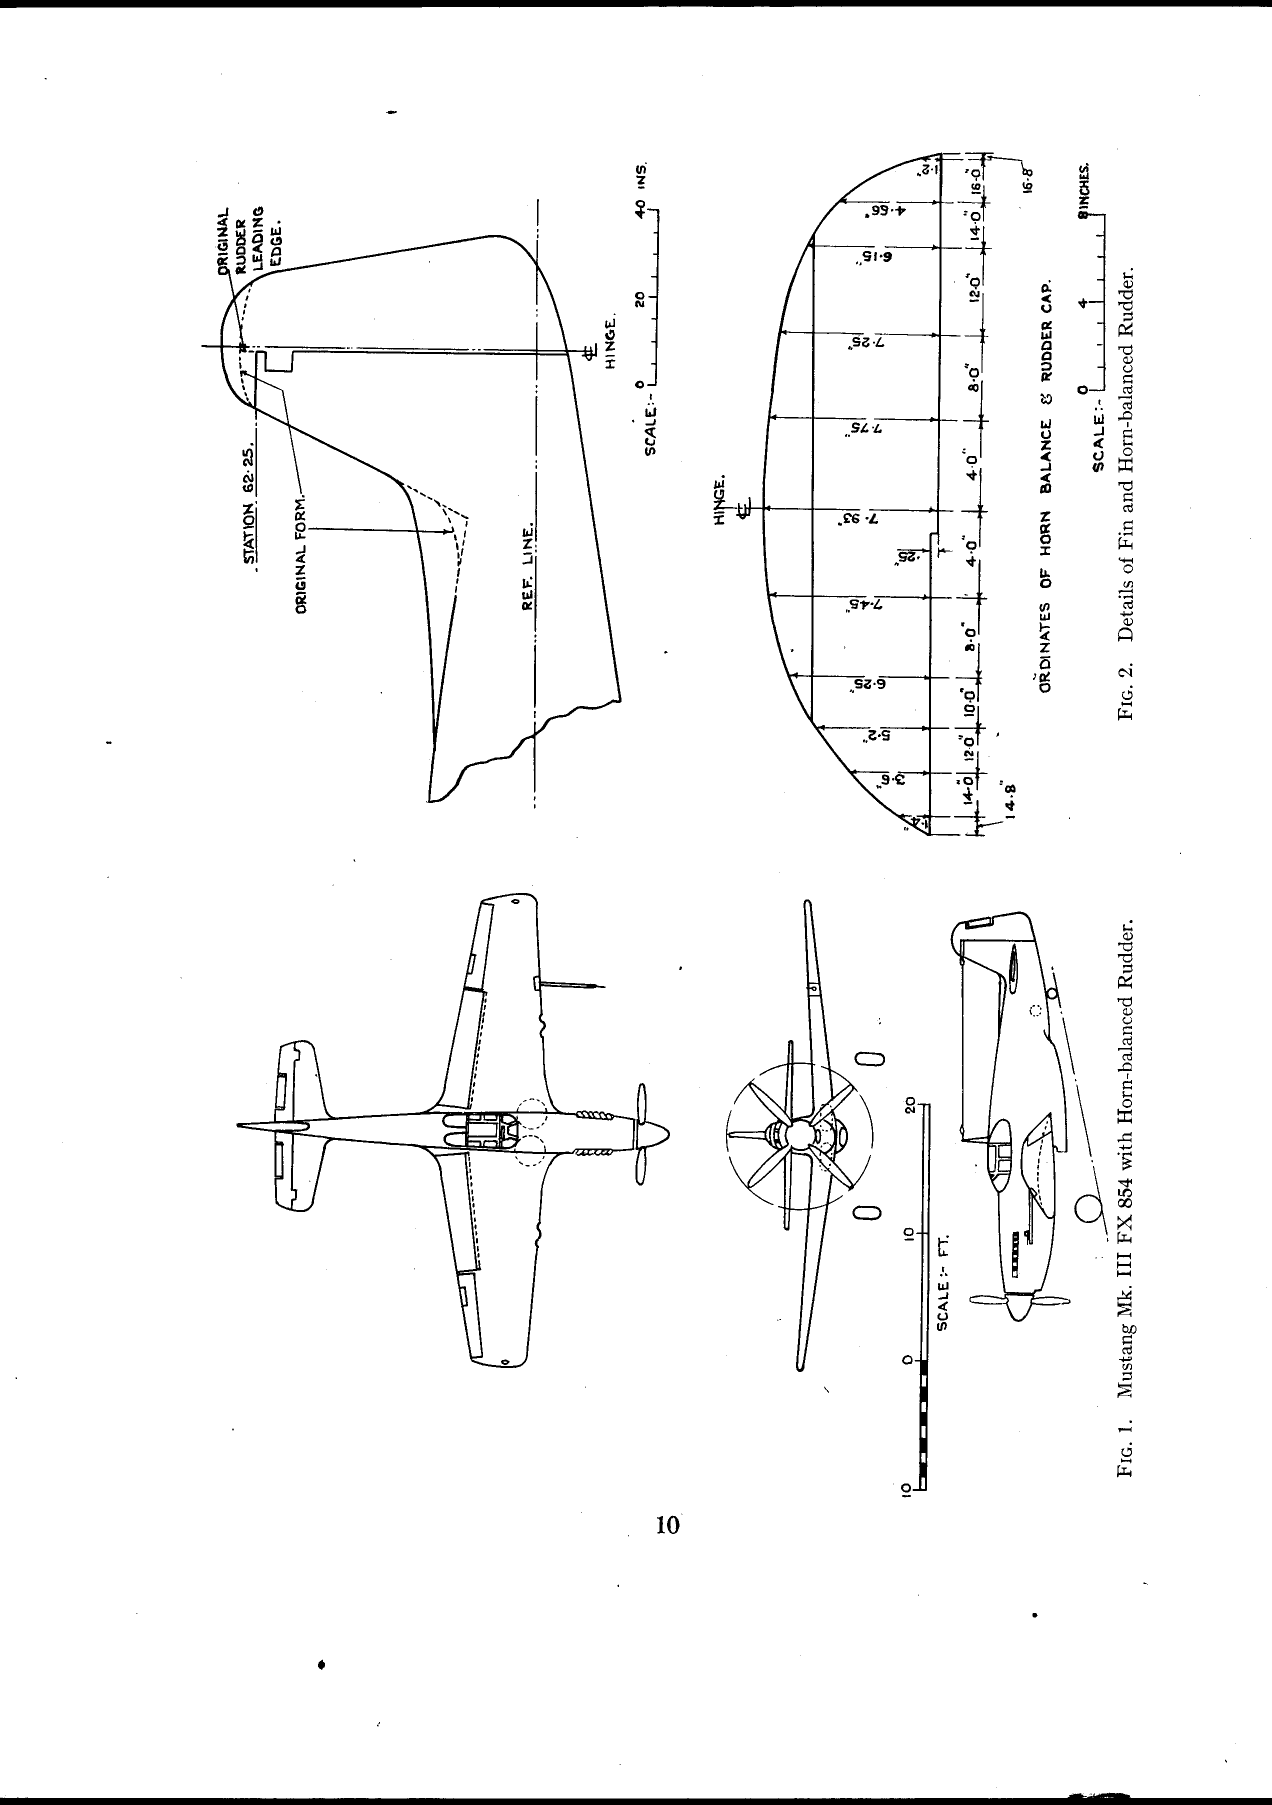 Sample page 10 from AirCorps Library document: Flight Measurements - Directional Stability & Trim - P-51